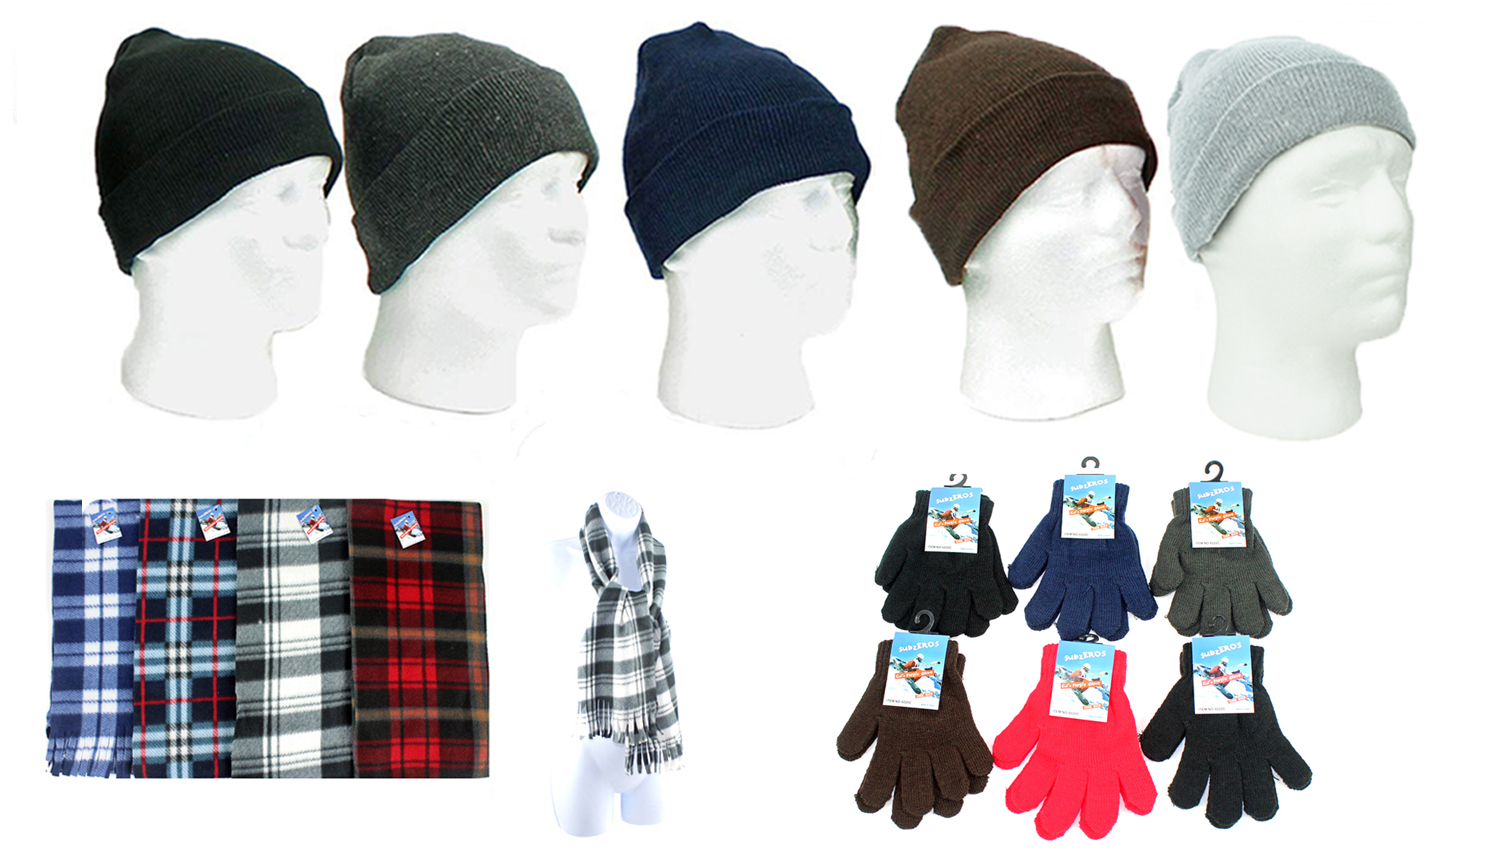 ''Adult Cuffed Winter Knit HATs, Adult Magic Gloves, and Adult Checkered Fleece Scarves''